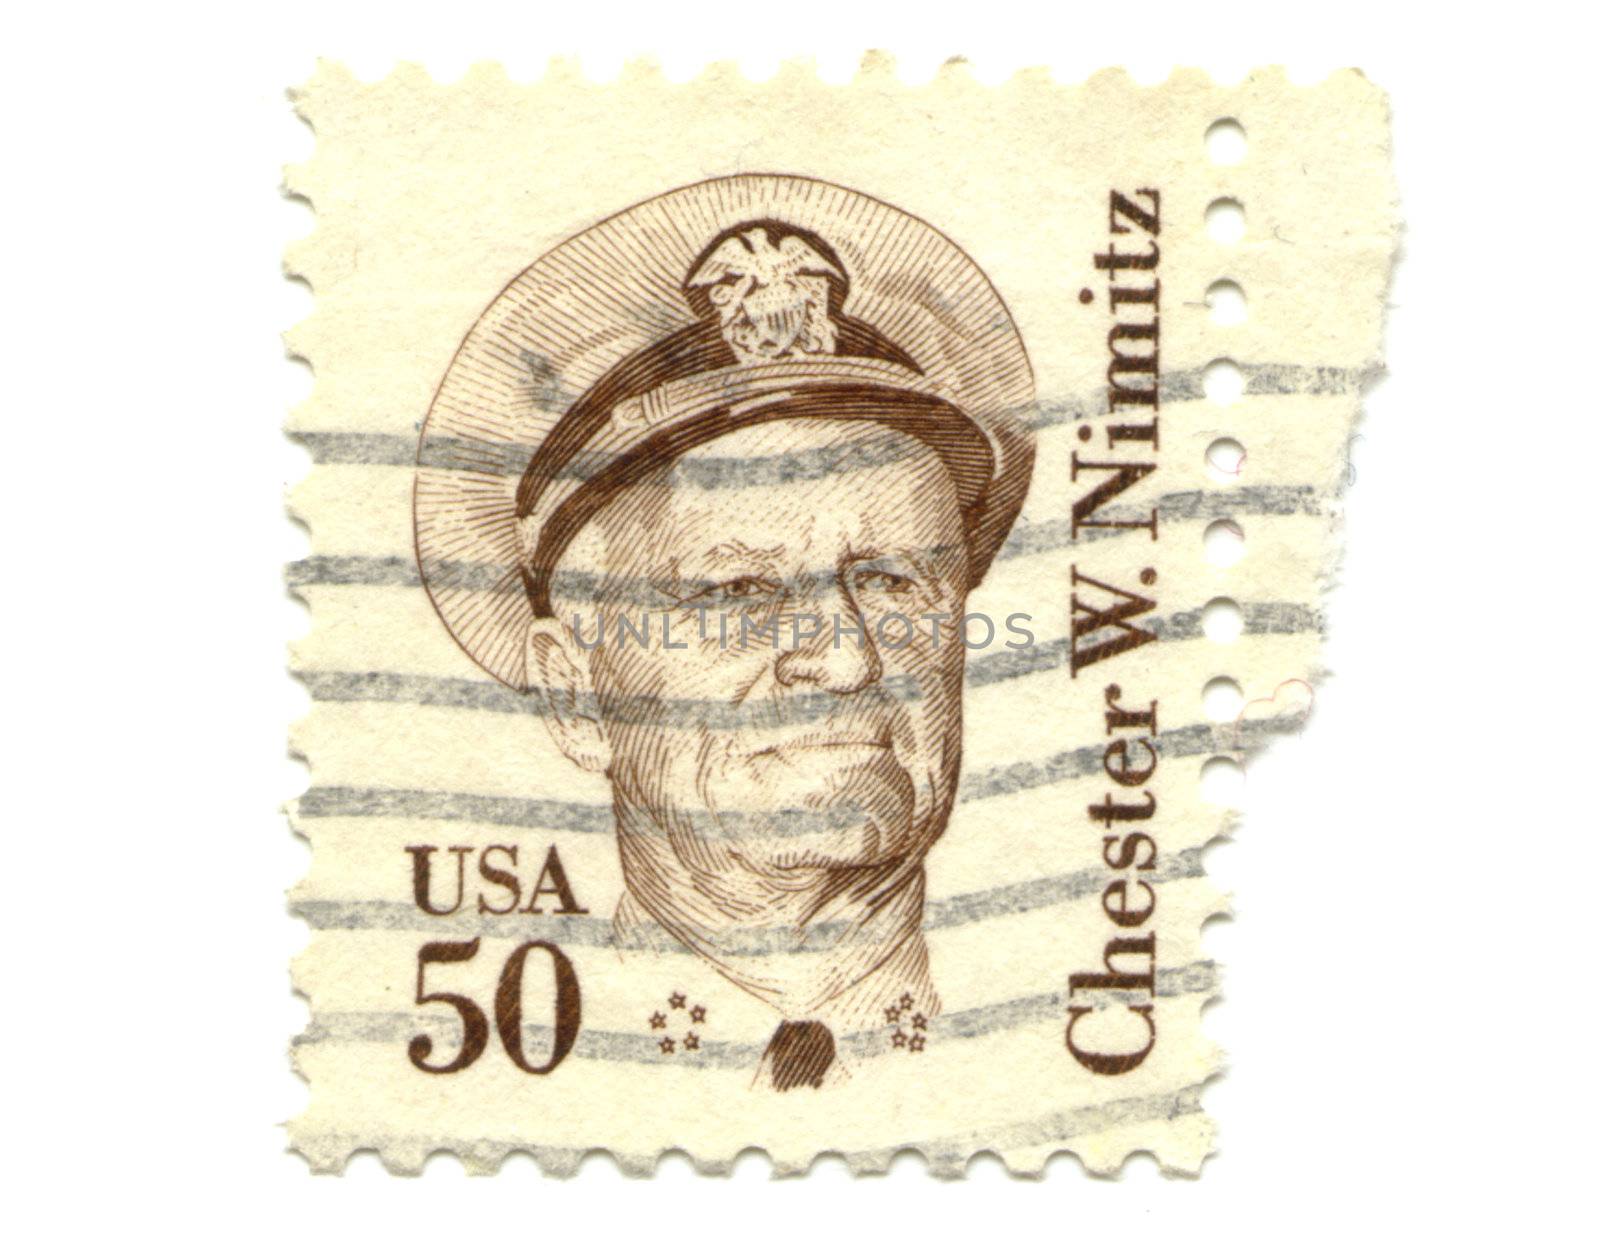 Old postage stamp from USA 50 cent  by fambros